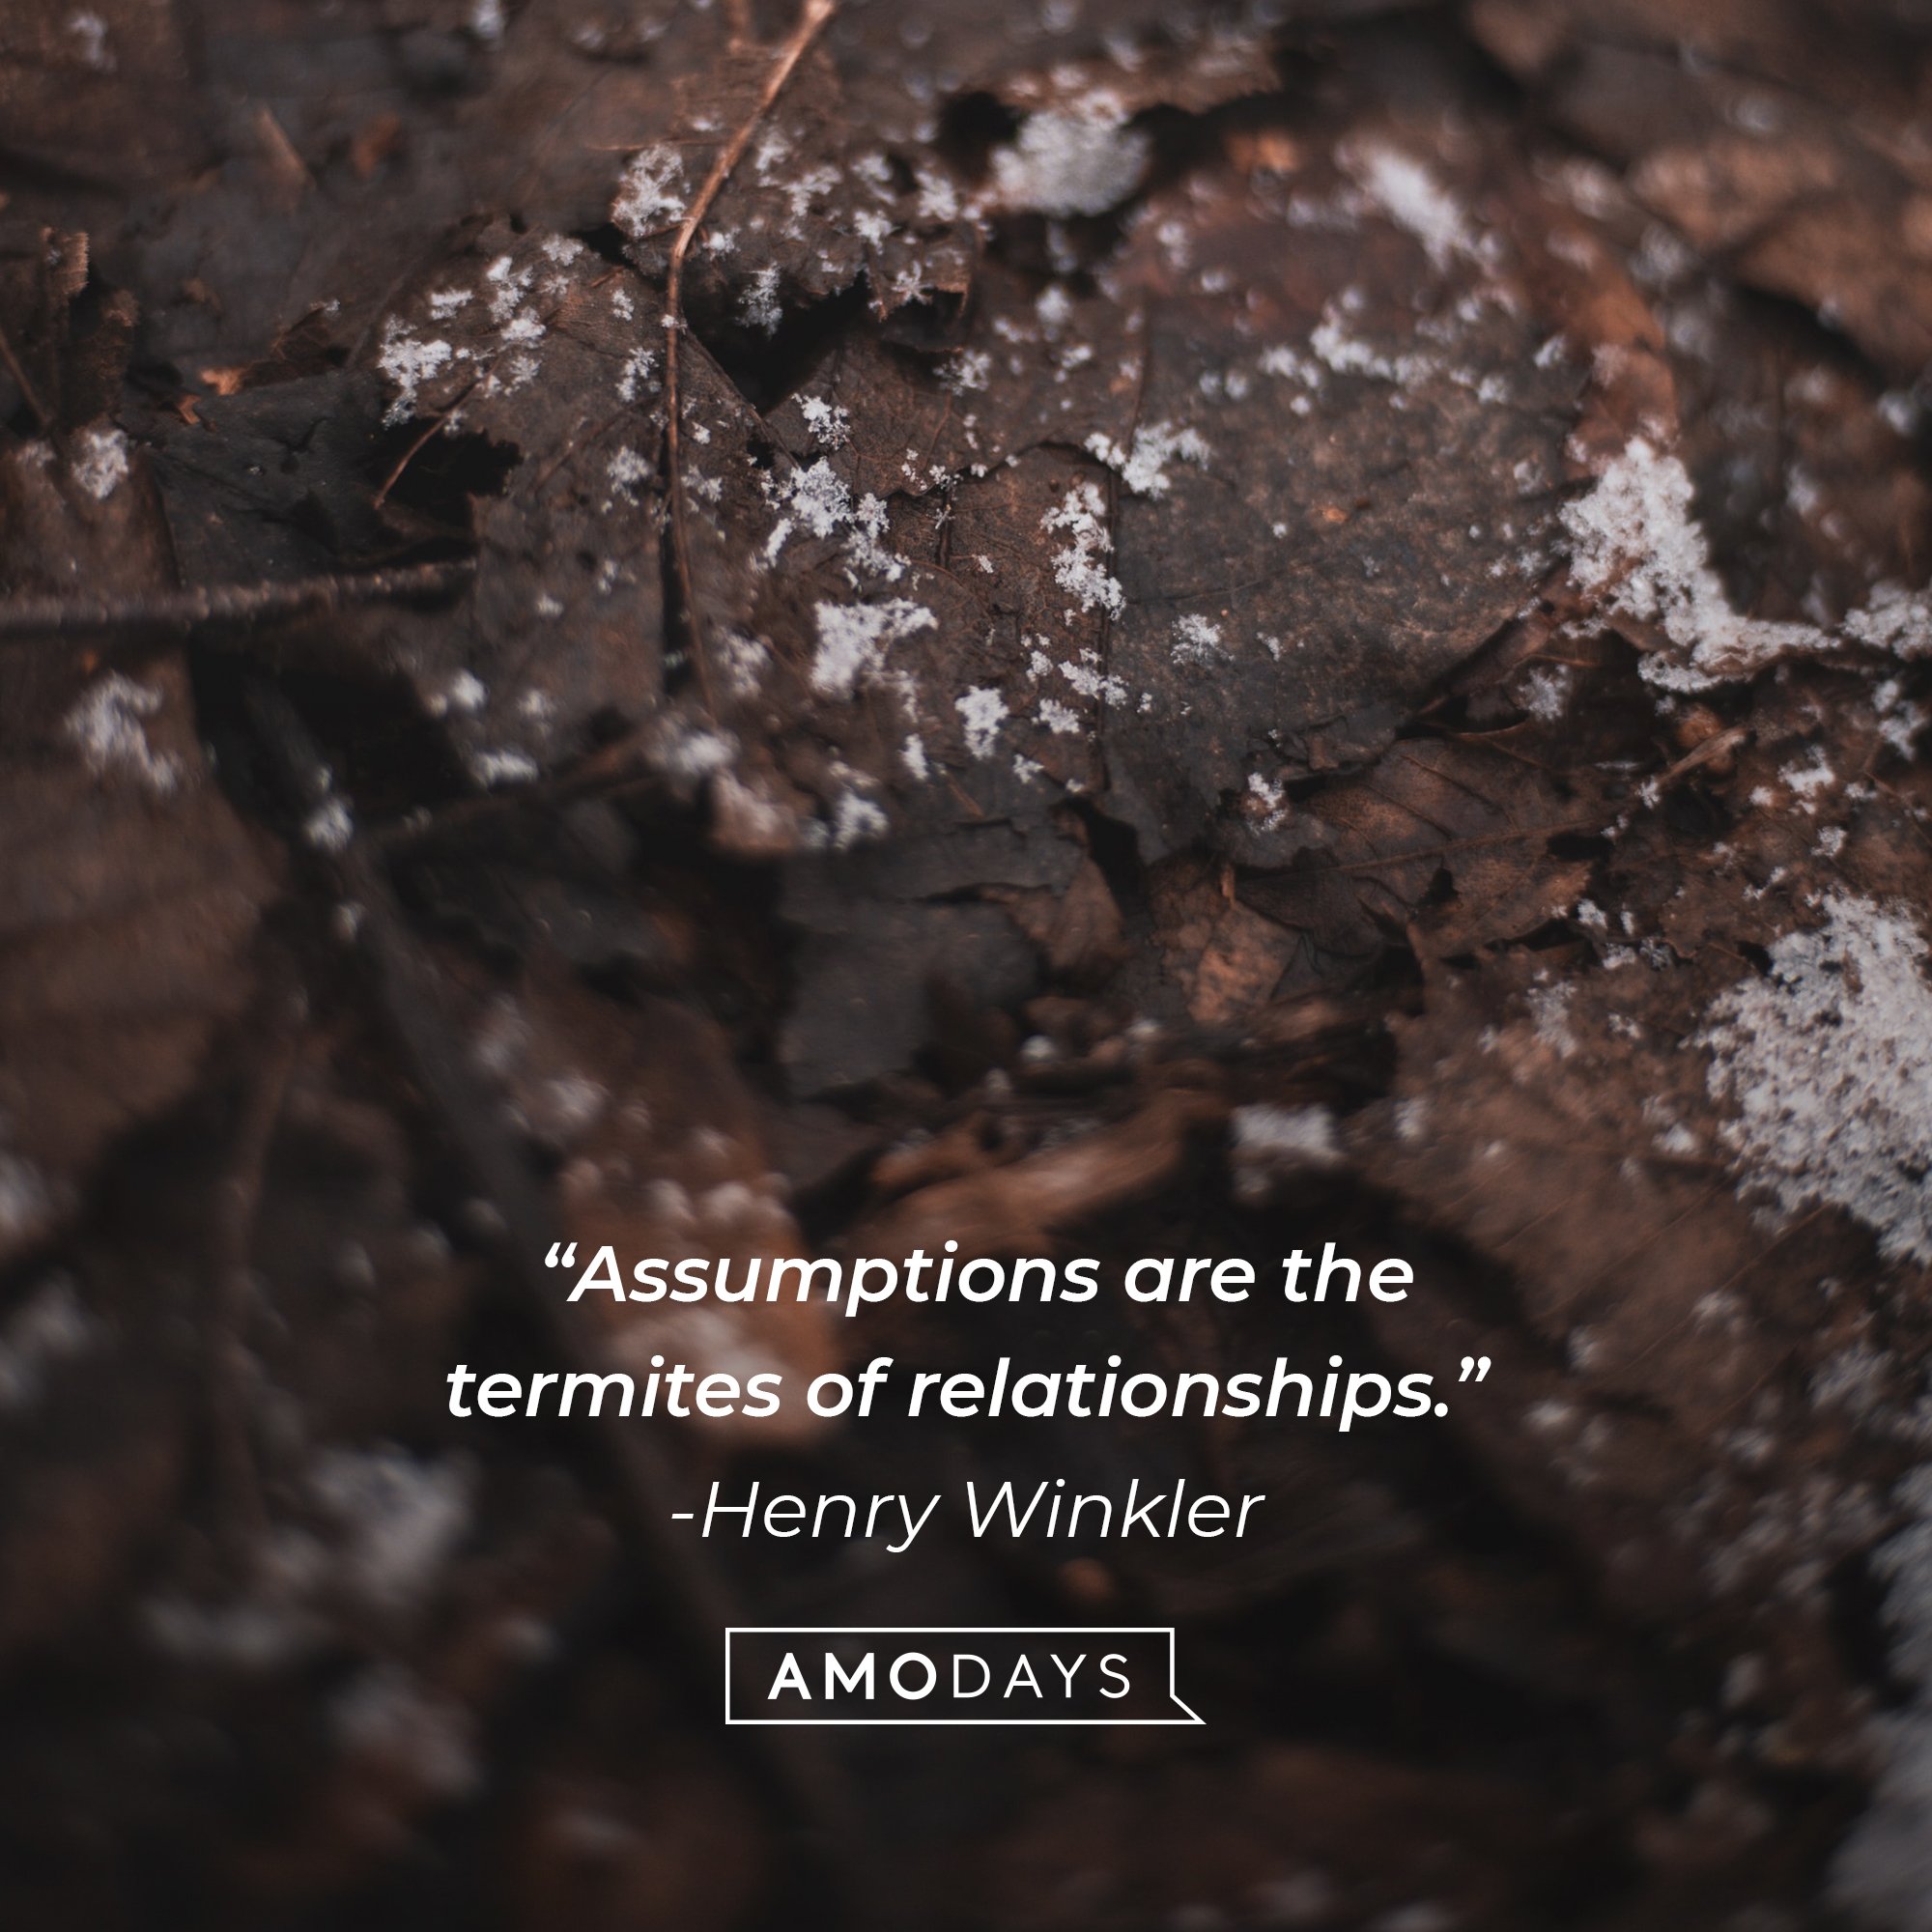   Henry Winkler's quote: “Assumptions are the termites of relationships.” | Image: AmoDays